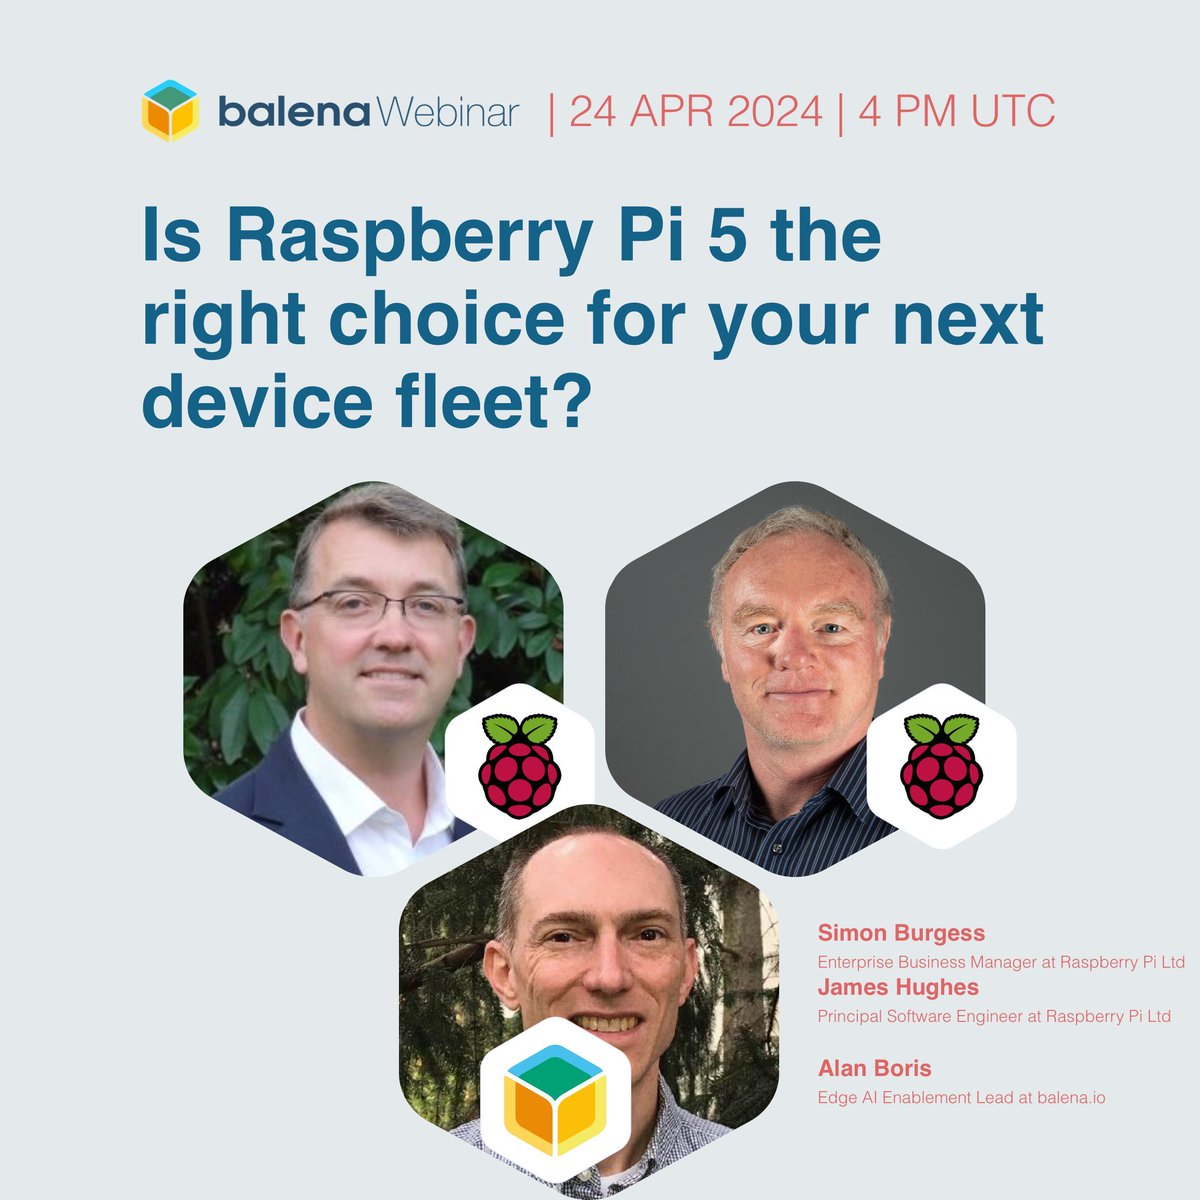 Got any questions about integrating Raspberry Pi 5 into your @balena_io fleet? Alan Boris with Simon Burgess & James Hughes from @Raspberry_Pi, are here to answer your questions on April 24th at 4pm UTC! Mark your calendars and join us! buff.ly/43xYfzp